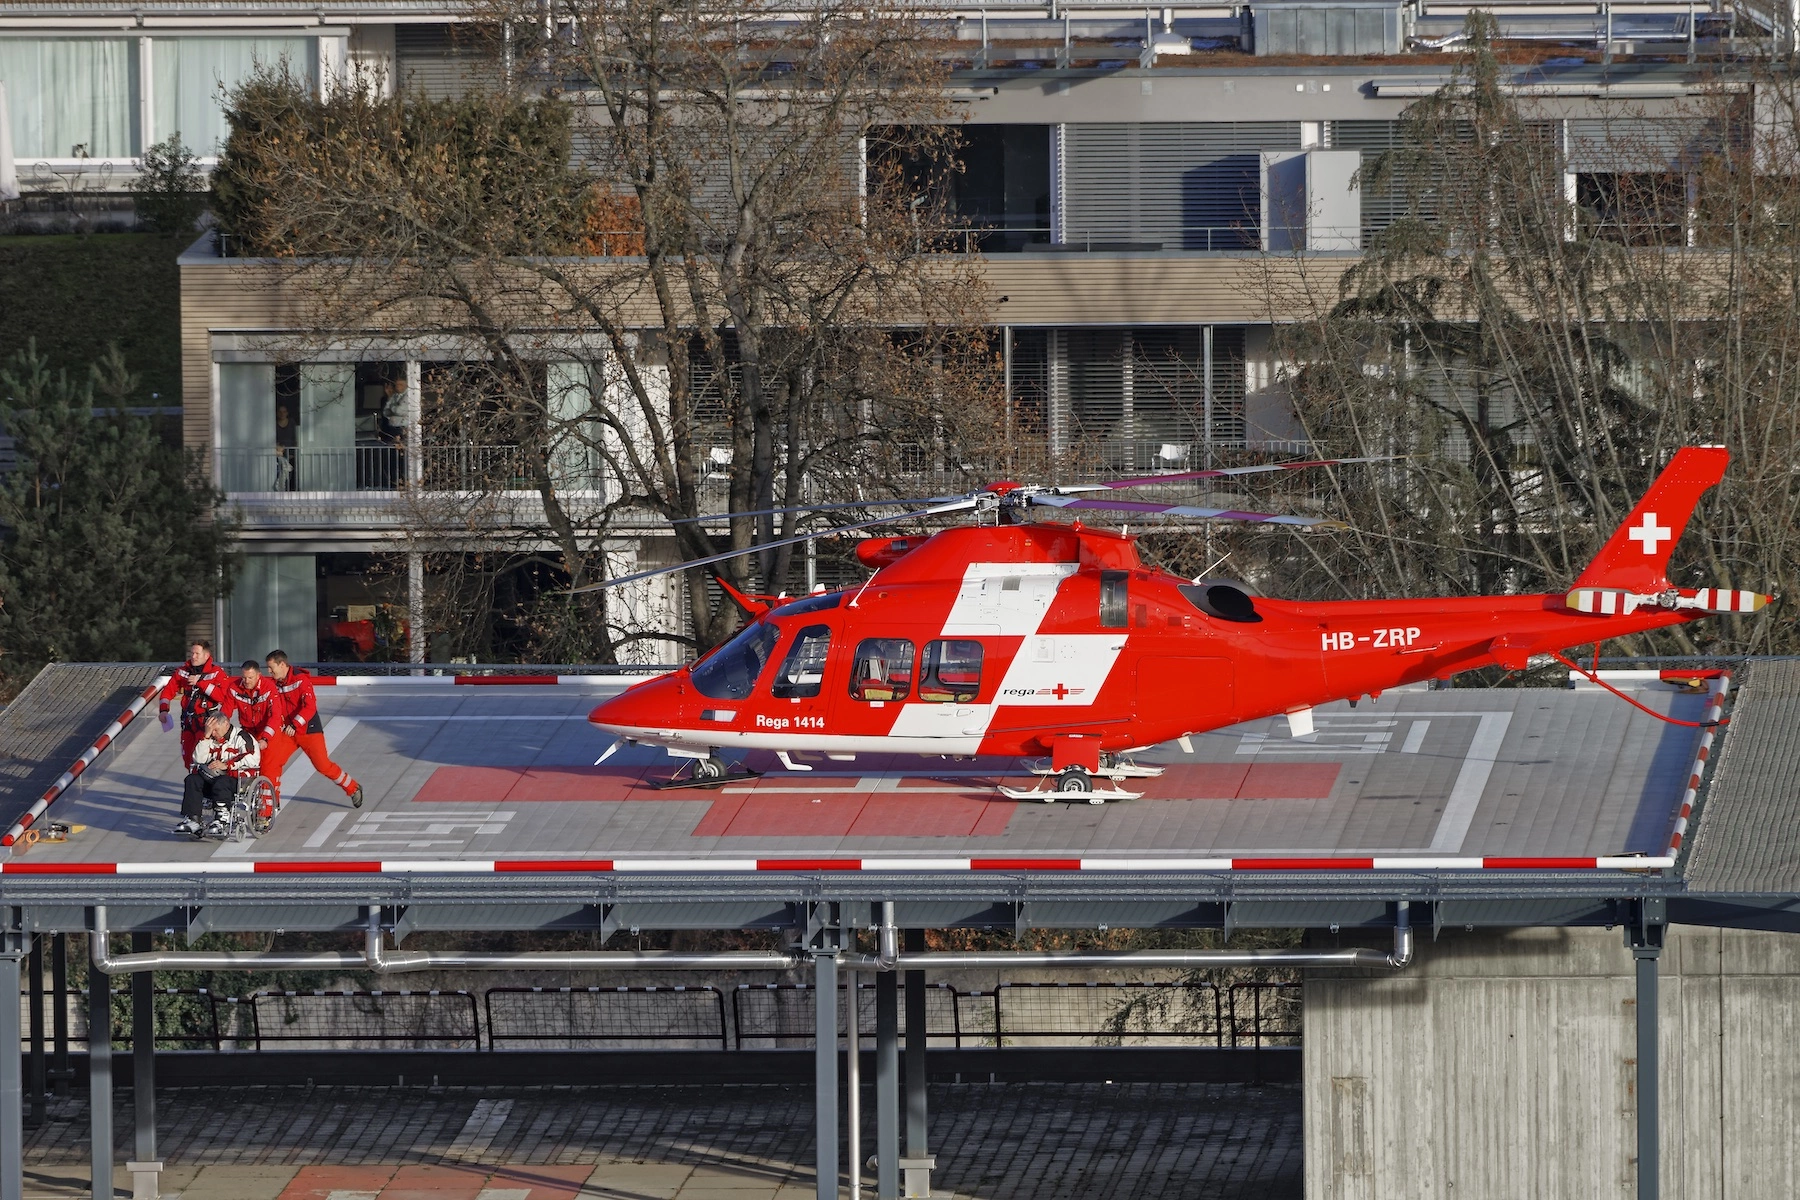 A helicopter sits on the helipad of a hospital in Thun, Switzerland while medics transport a patient in a wheelchair